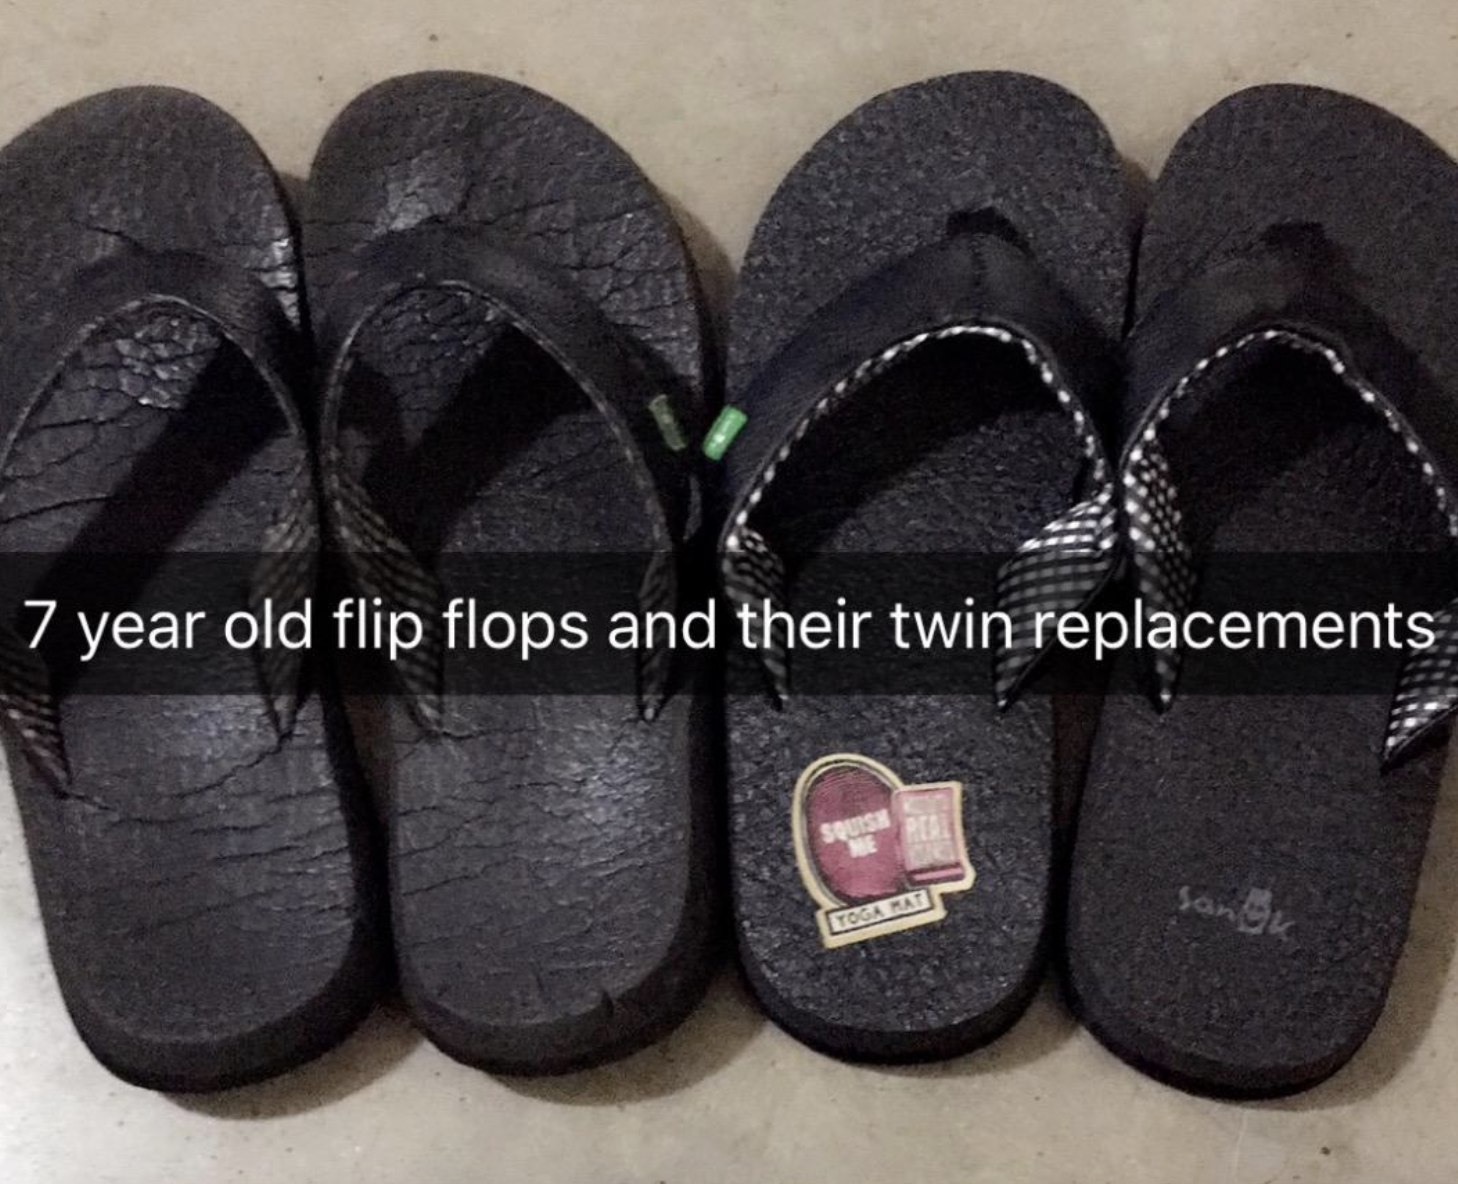 two pairs of black flip flops side-by-side labeled &quot;7 year old flip flops and their twin replacements&quot; 